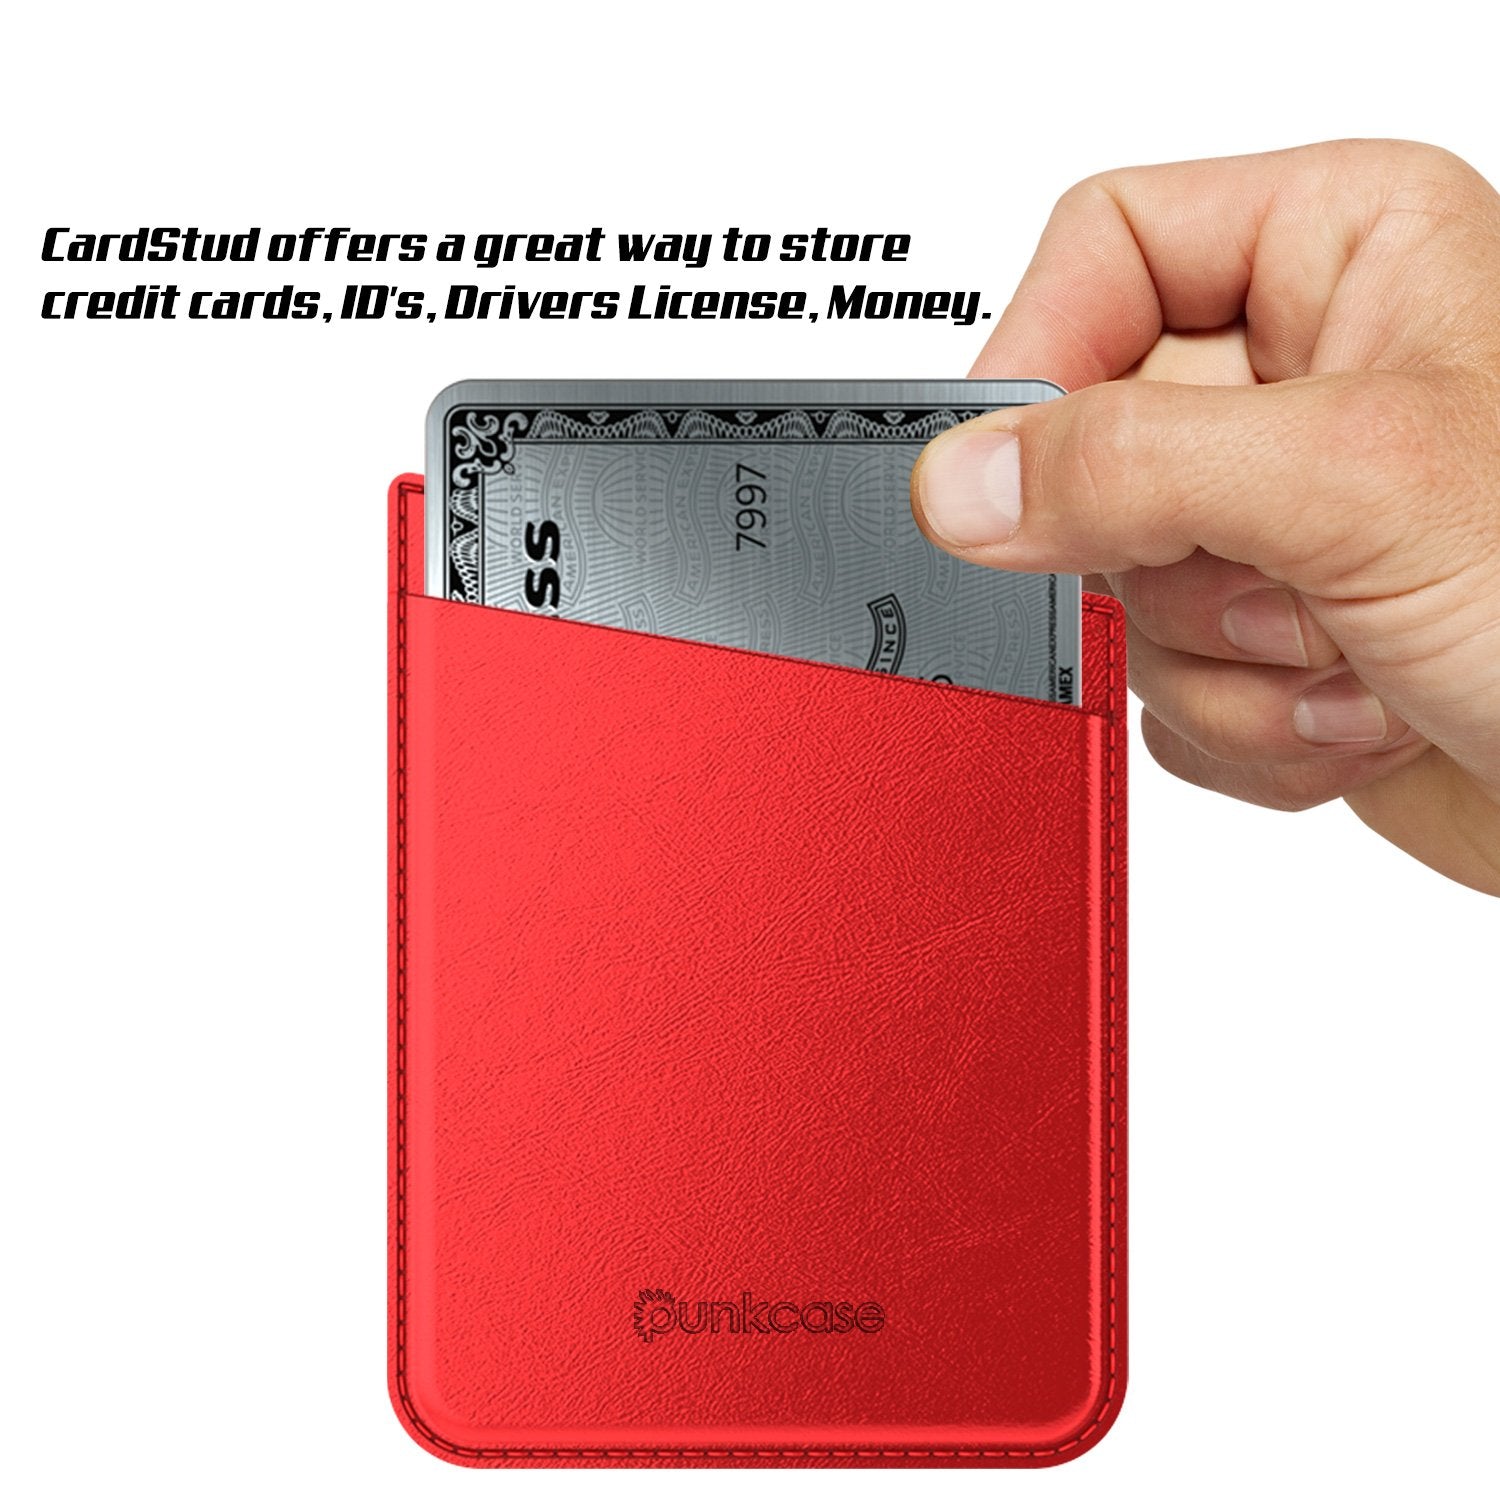 PunkCase CardStud Deluxe Stick On Wallet | Adhesive Card Holder Attachment for Back of iPhone, Android & More | Leather Pouch | [Red] - PunkCase NZ